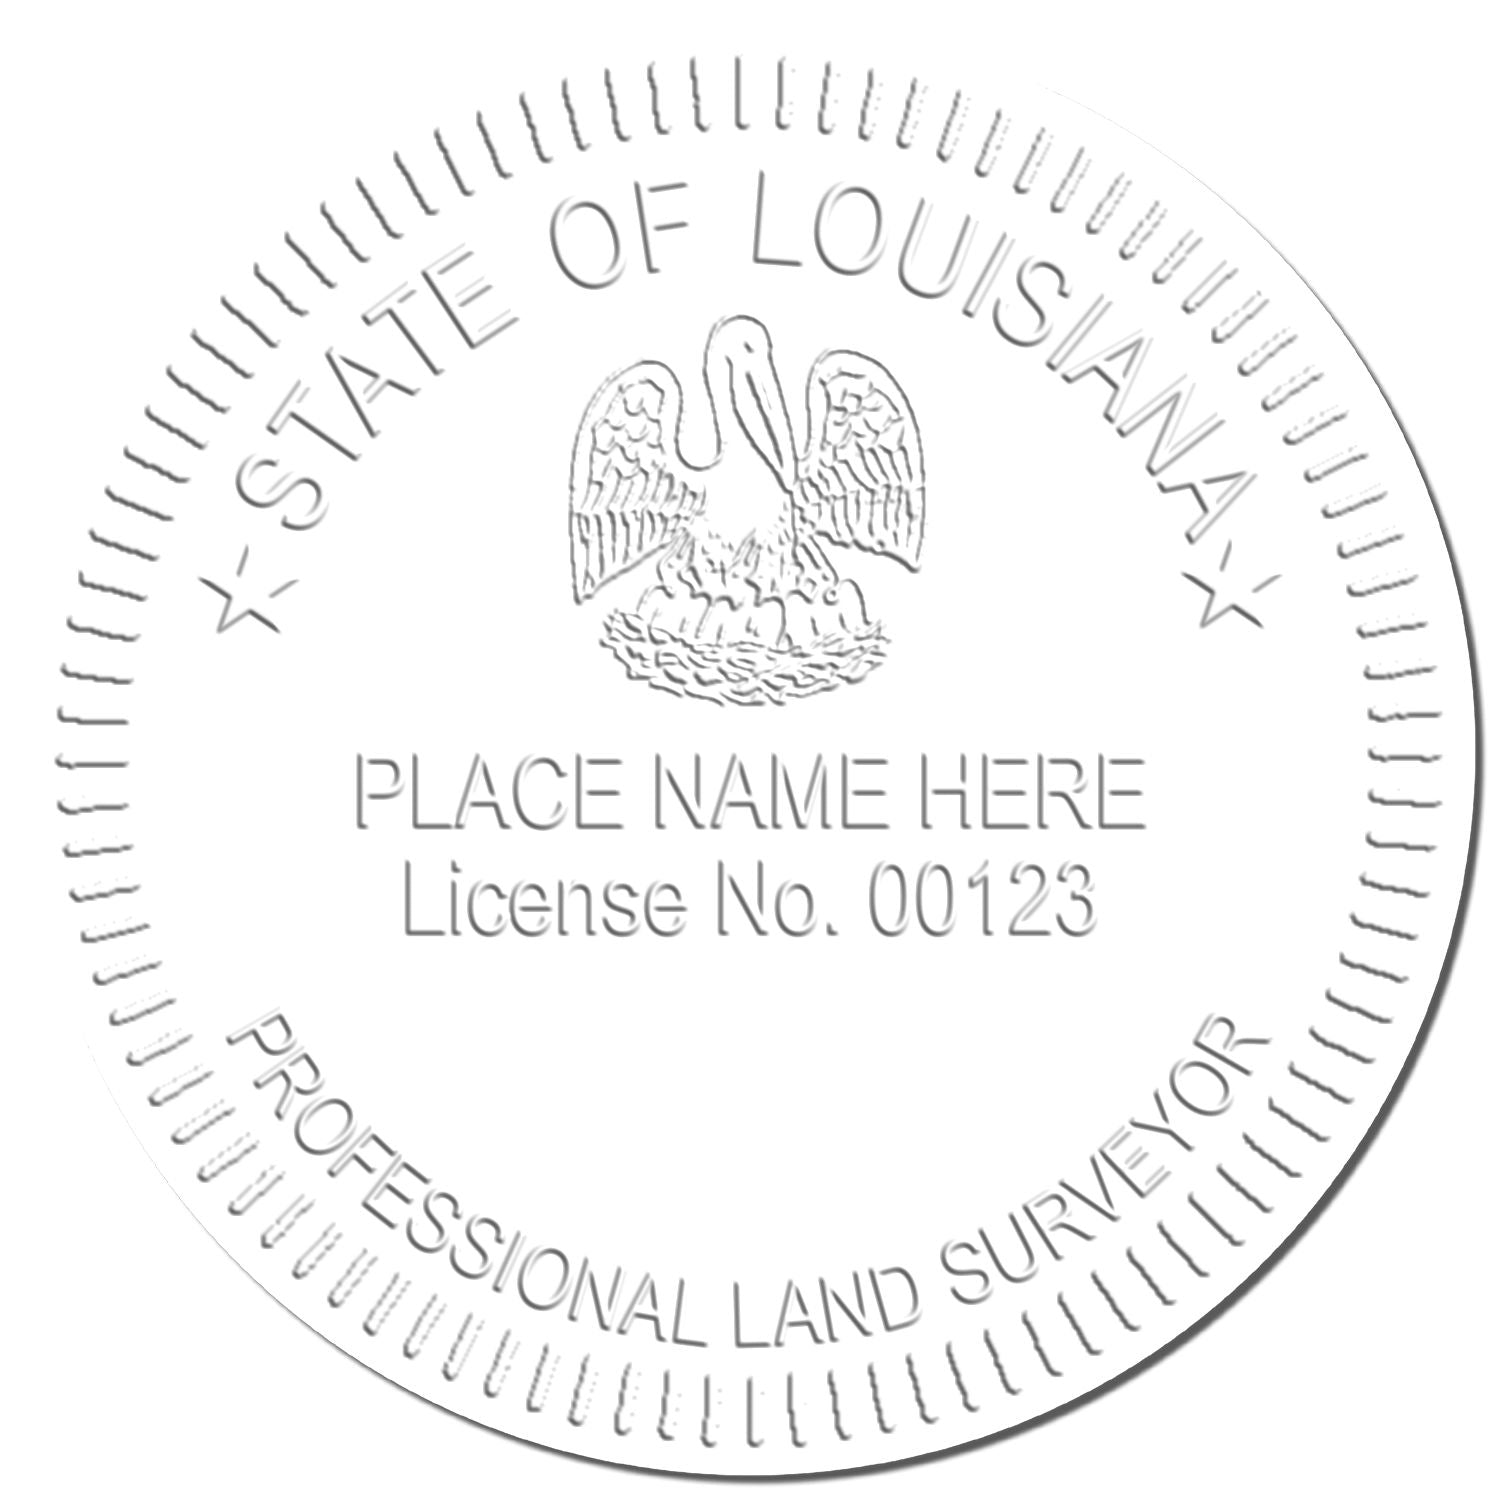 This paper is stamped with a sample imprint of the Gift Louisiana Land Surveyor Seal, signifying its quality and reliability.